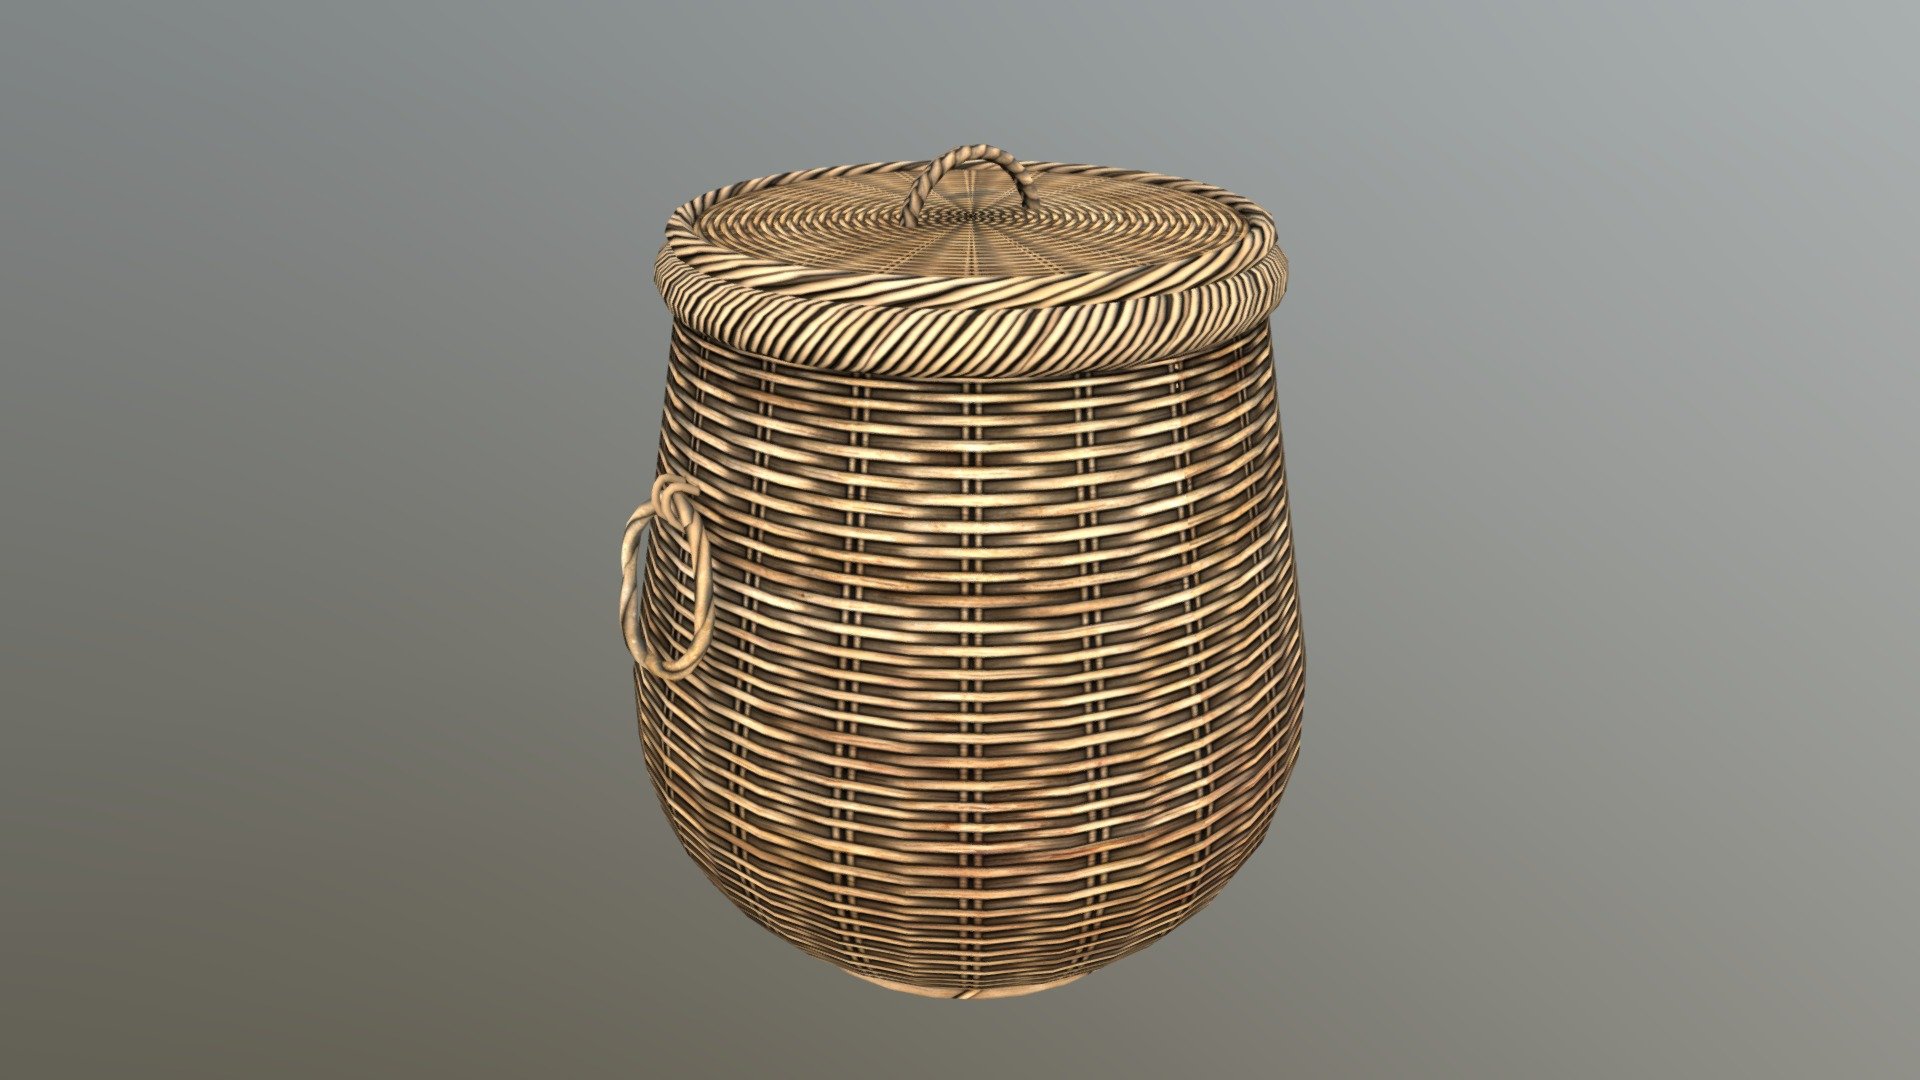 3D Baskets
The pack has highly detailed baskets ready for use in your project. Just drag and drop prefabs into your scene and achieve beautiful results in no time. Available formats FBX, 3DS Max 2017



We are here to empower the creators. Please contact us via the [Contact US](https://aaanimators.com/#contact-area) page if you are having issues with our assets. 




The following document provides a highly detailed description of the asset:
[READ ME]()




**Mesh complexities:**


Basket_01 1517 verts; 2412 tris

Basket_01_Cap 351 verts; 536 tris


Includes 1 sets of textures with 4 materials:


● Diffuse

● Gloss

● Normal

● Specular - Low Poly Basket 01 - Buy Royalty Free 3D model by aaanimators 3d model